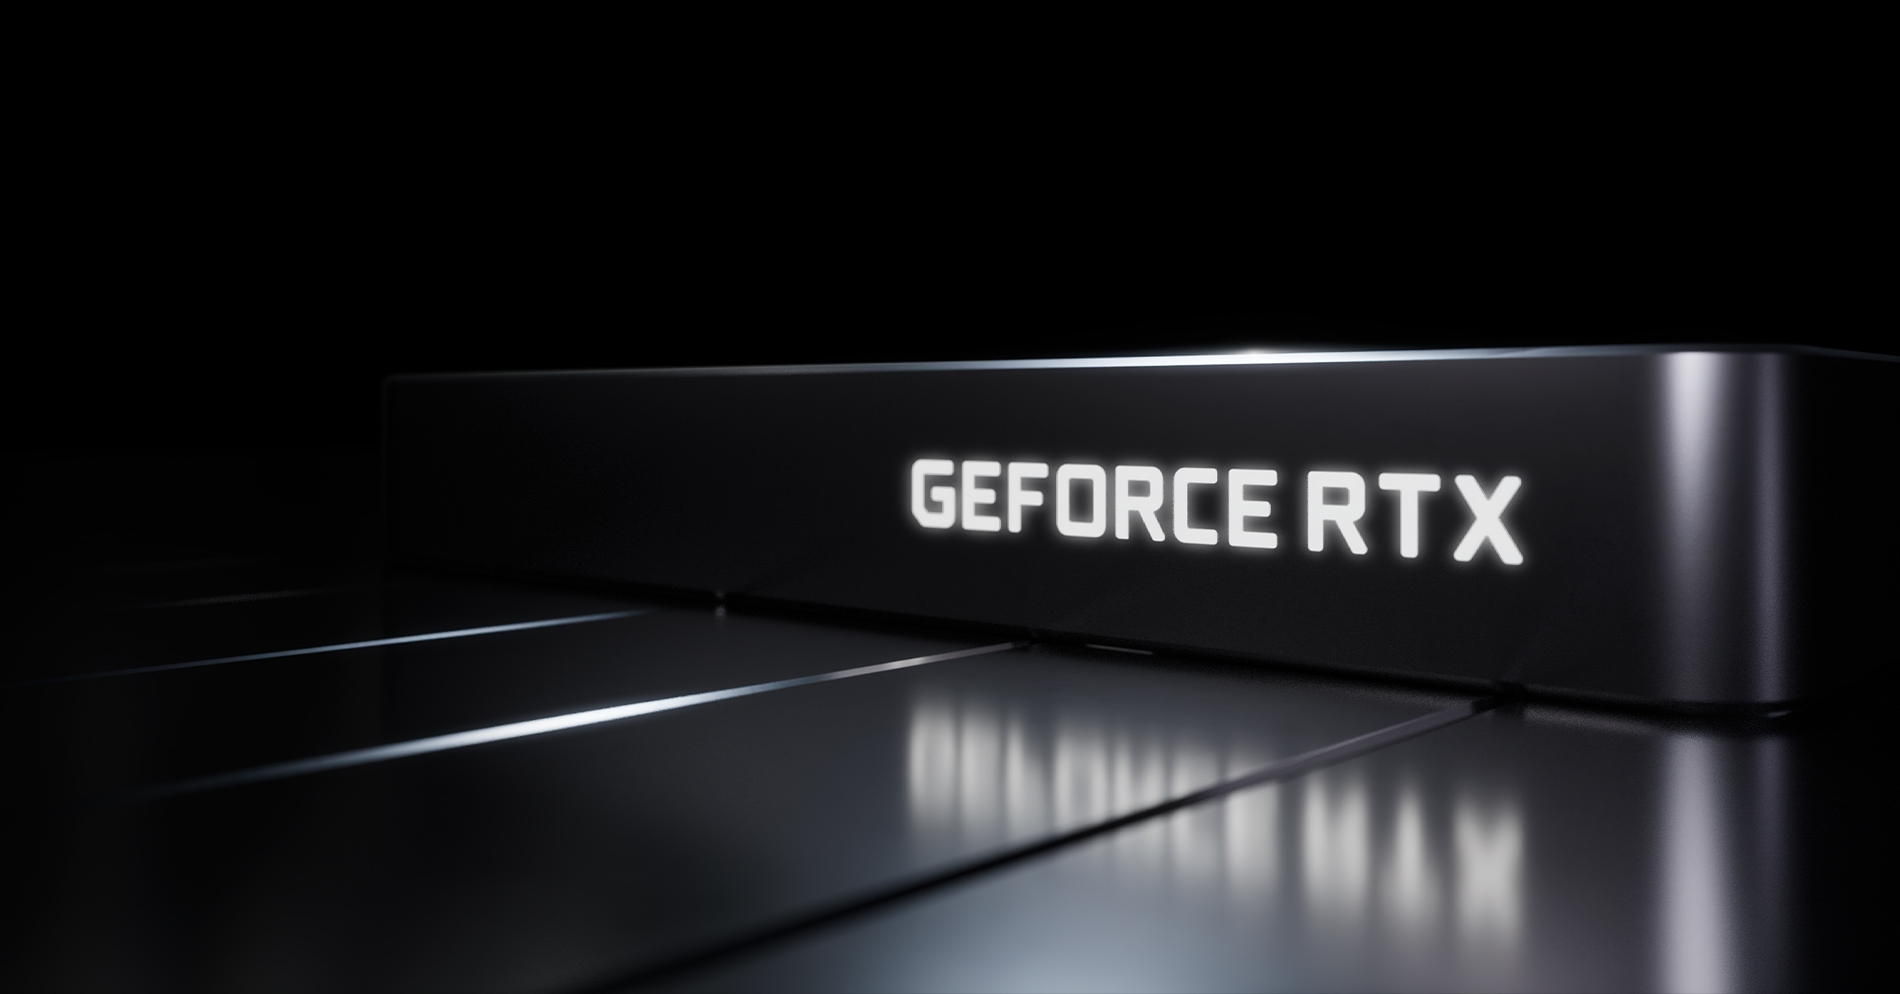 Media asset in full size related to 3dfxzone.it news item entitled as follows: On line le specifiche aggiornate della video card GeForce RTX 4080 di NVIDIA | Image Name: news33538_NVIDIA-GeForce-RTX-4080_Specifications_1.jpg